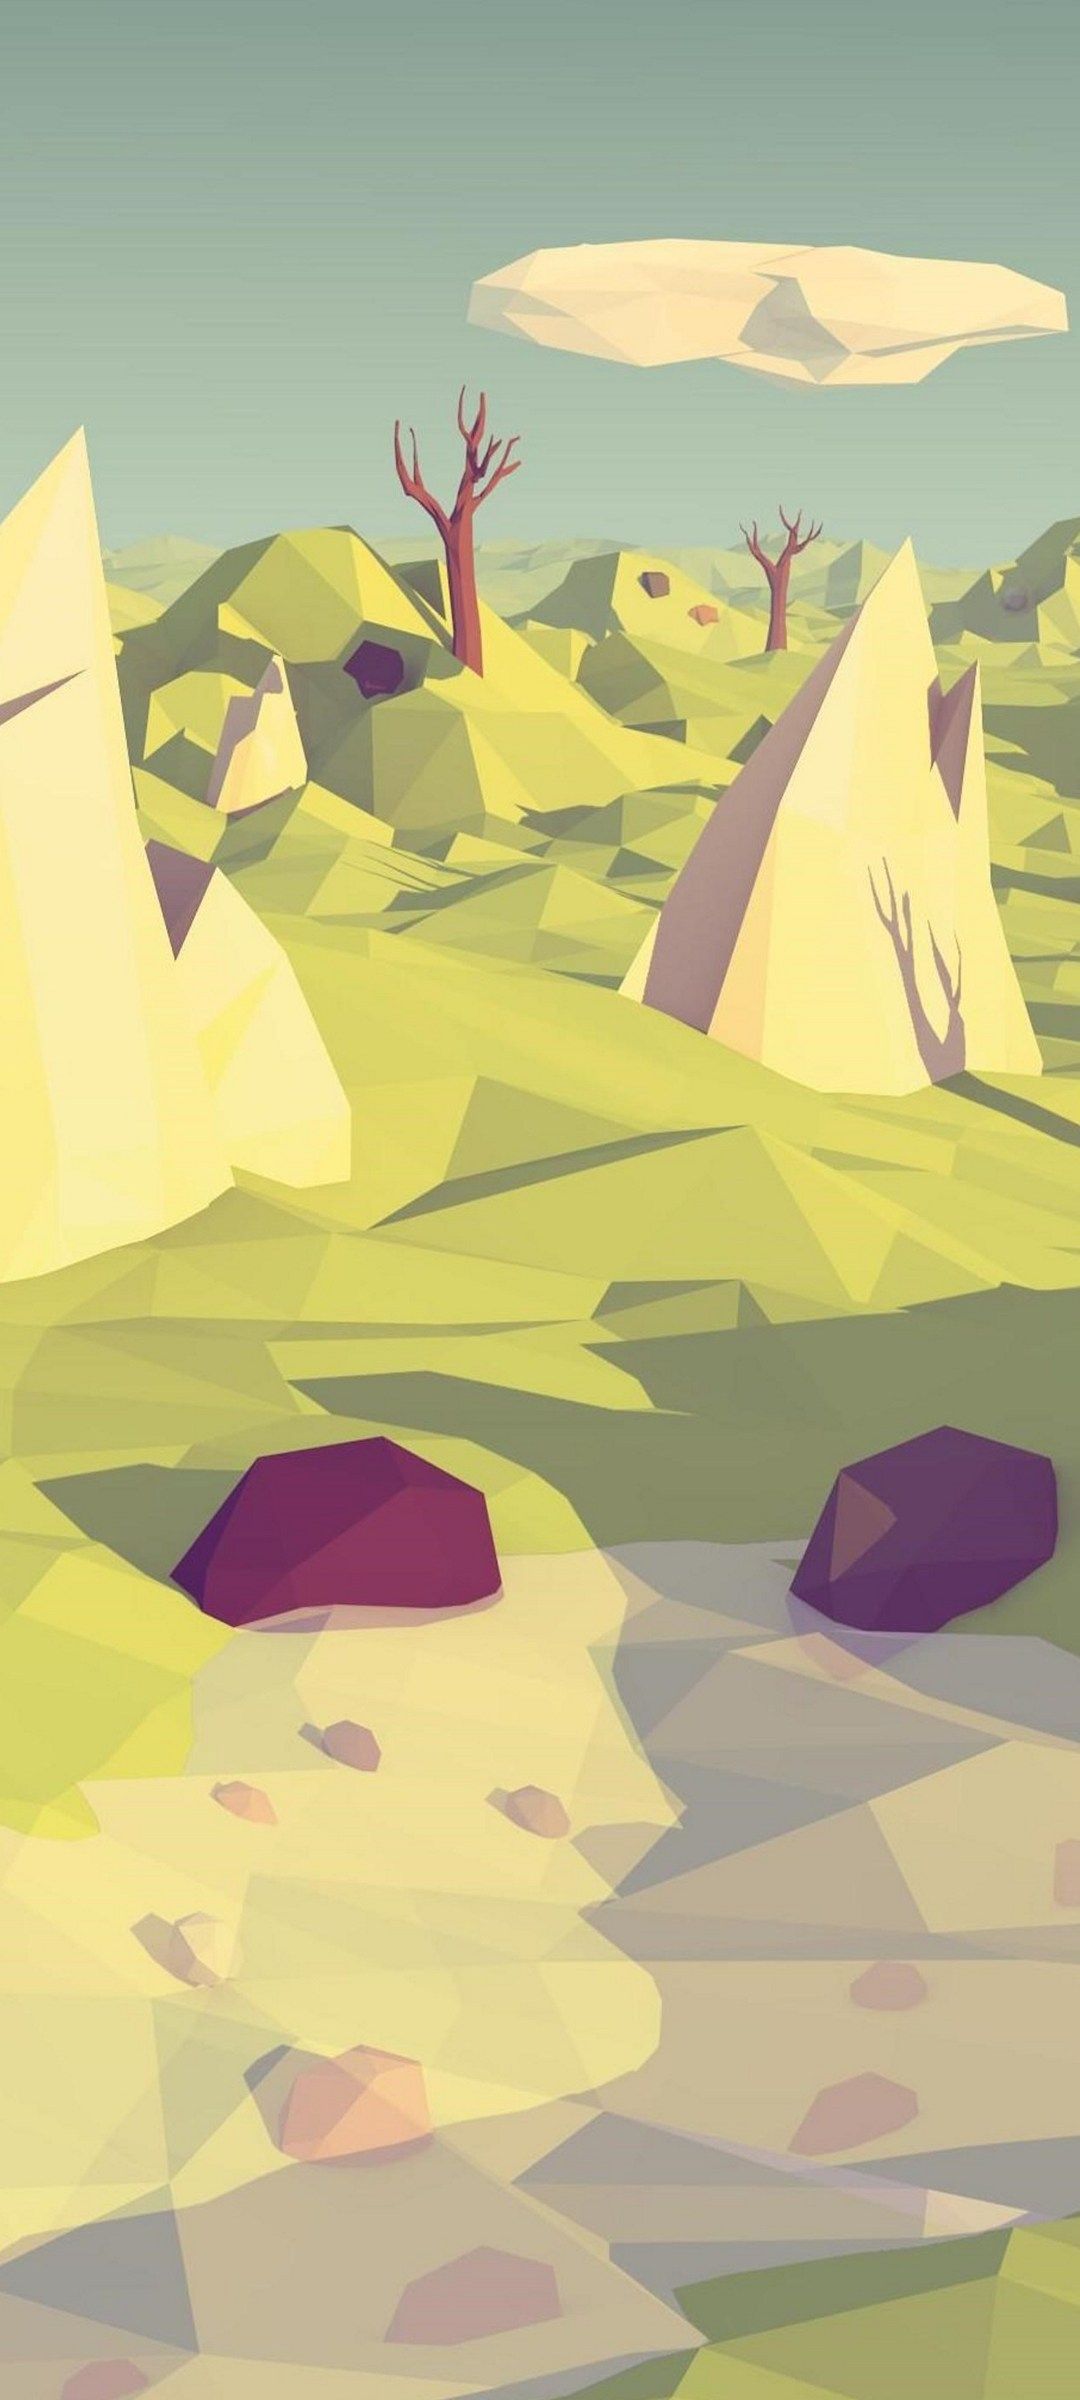 A low poly illustration of a desert landscape with rocks and trees - 1080x2400, low poly